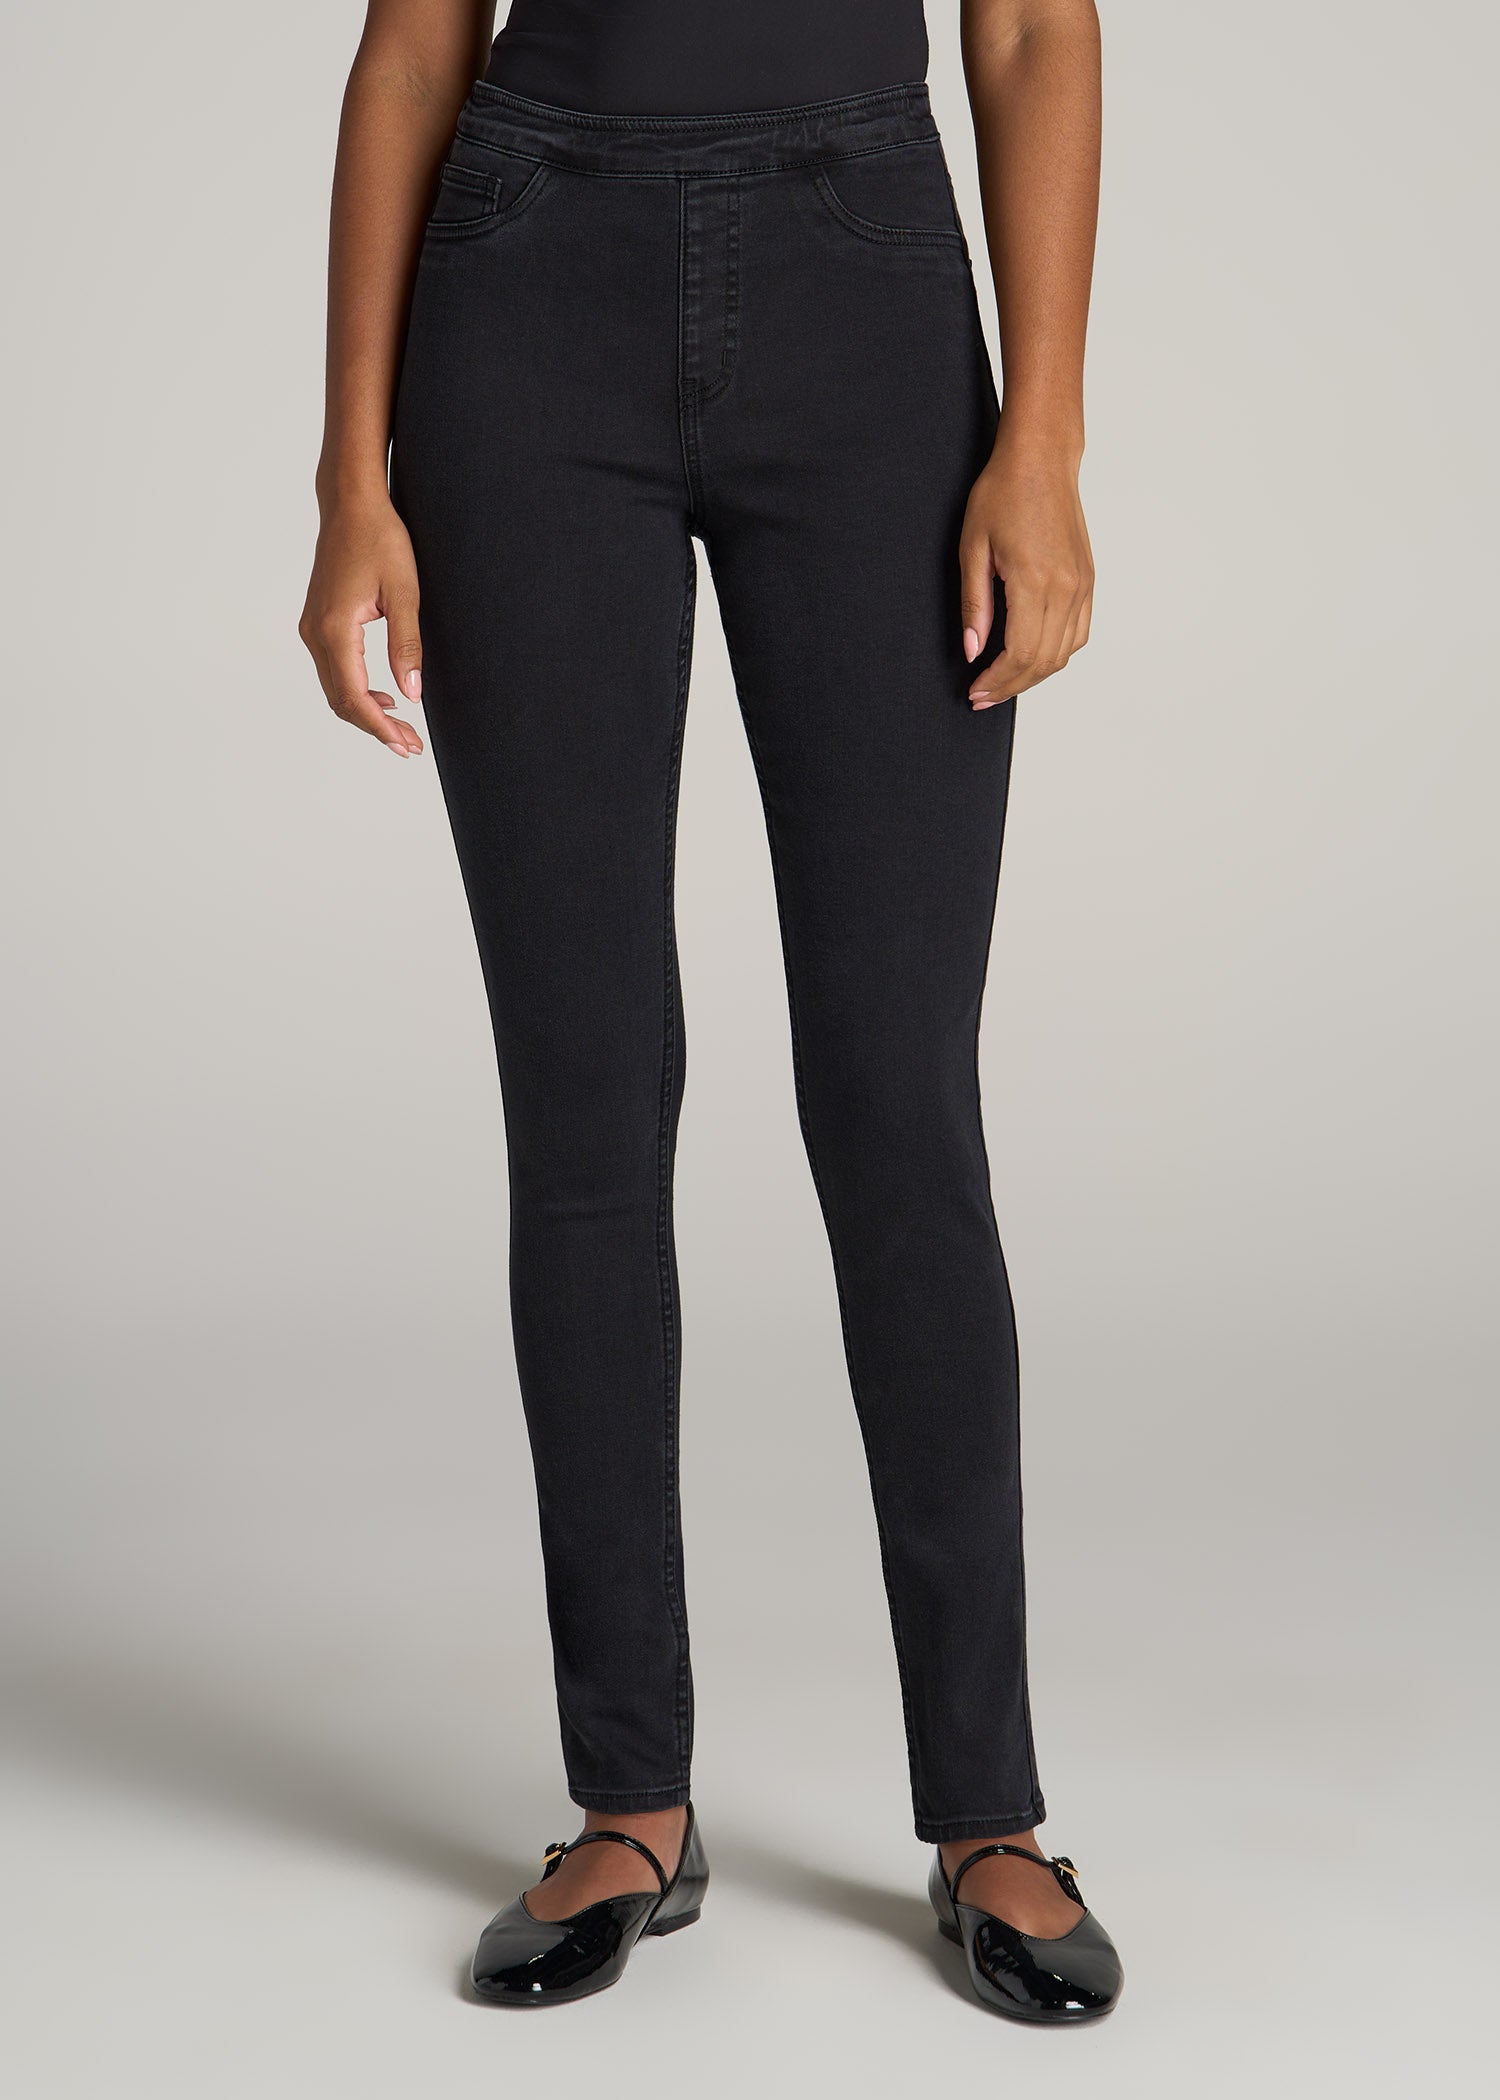 Cotton:On mid rise jeggings in dark rinse